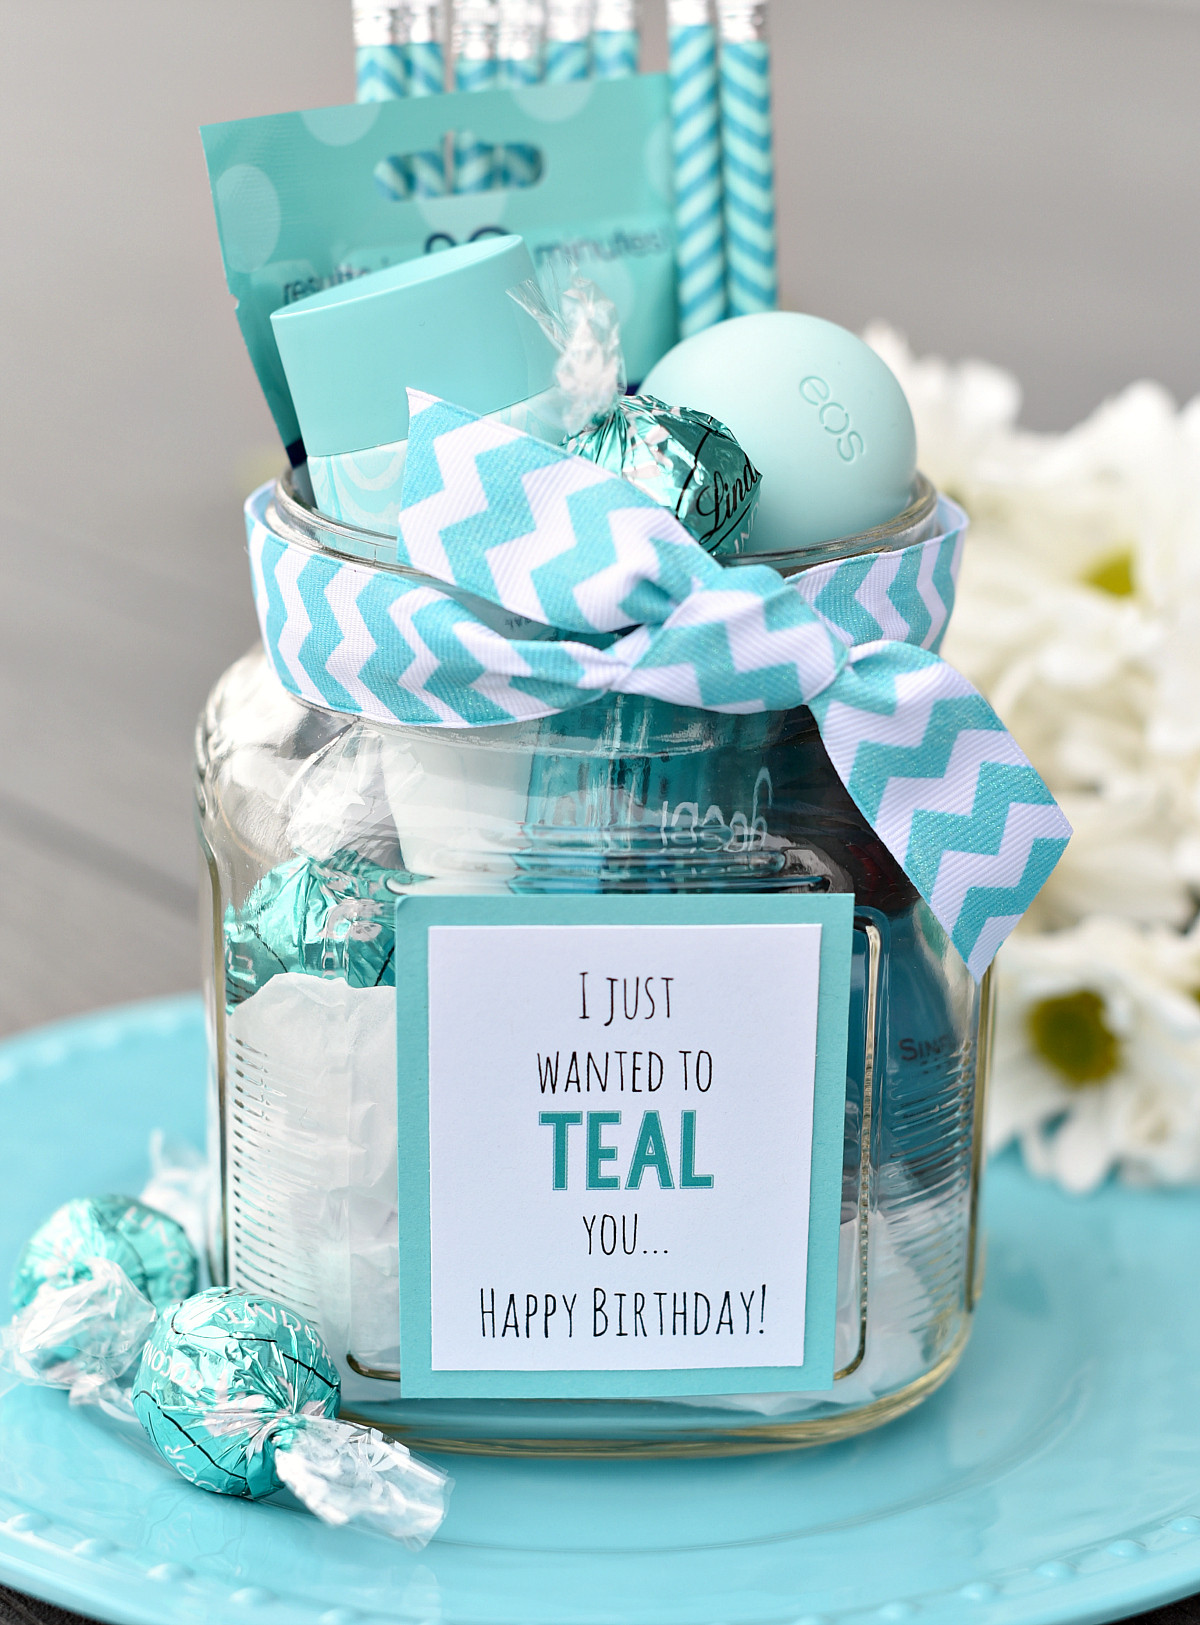 Gifts For Best Friends Birthday
 Teal Birthday Gift Idea for Friends – Fun Squared